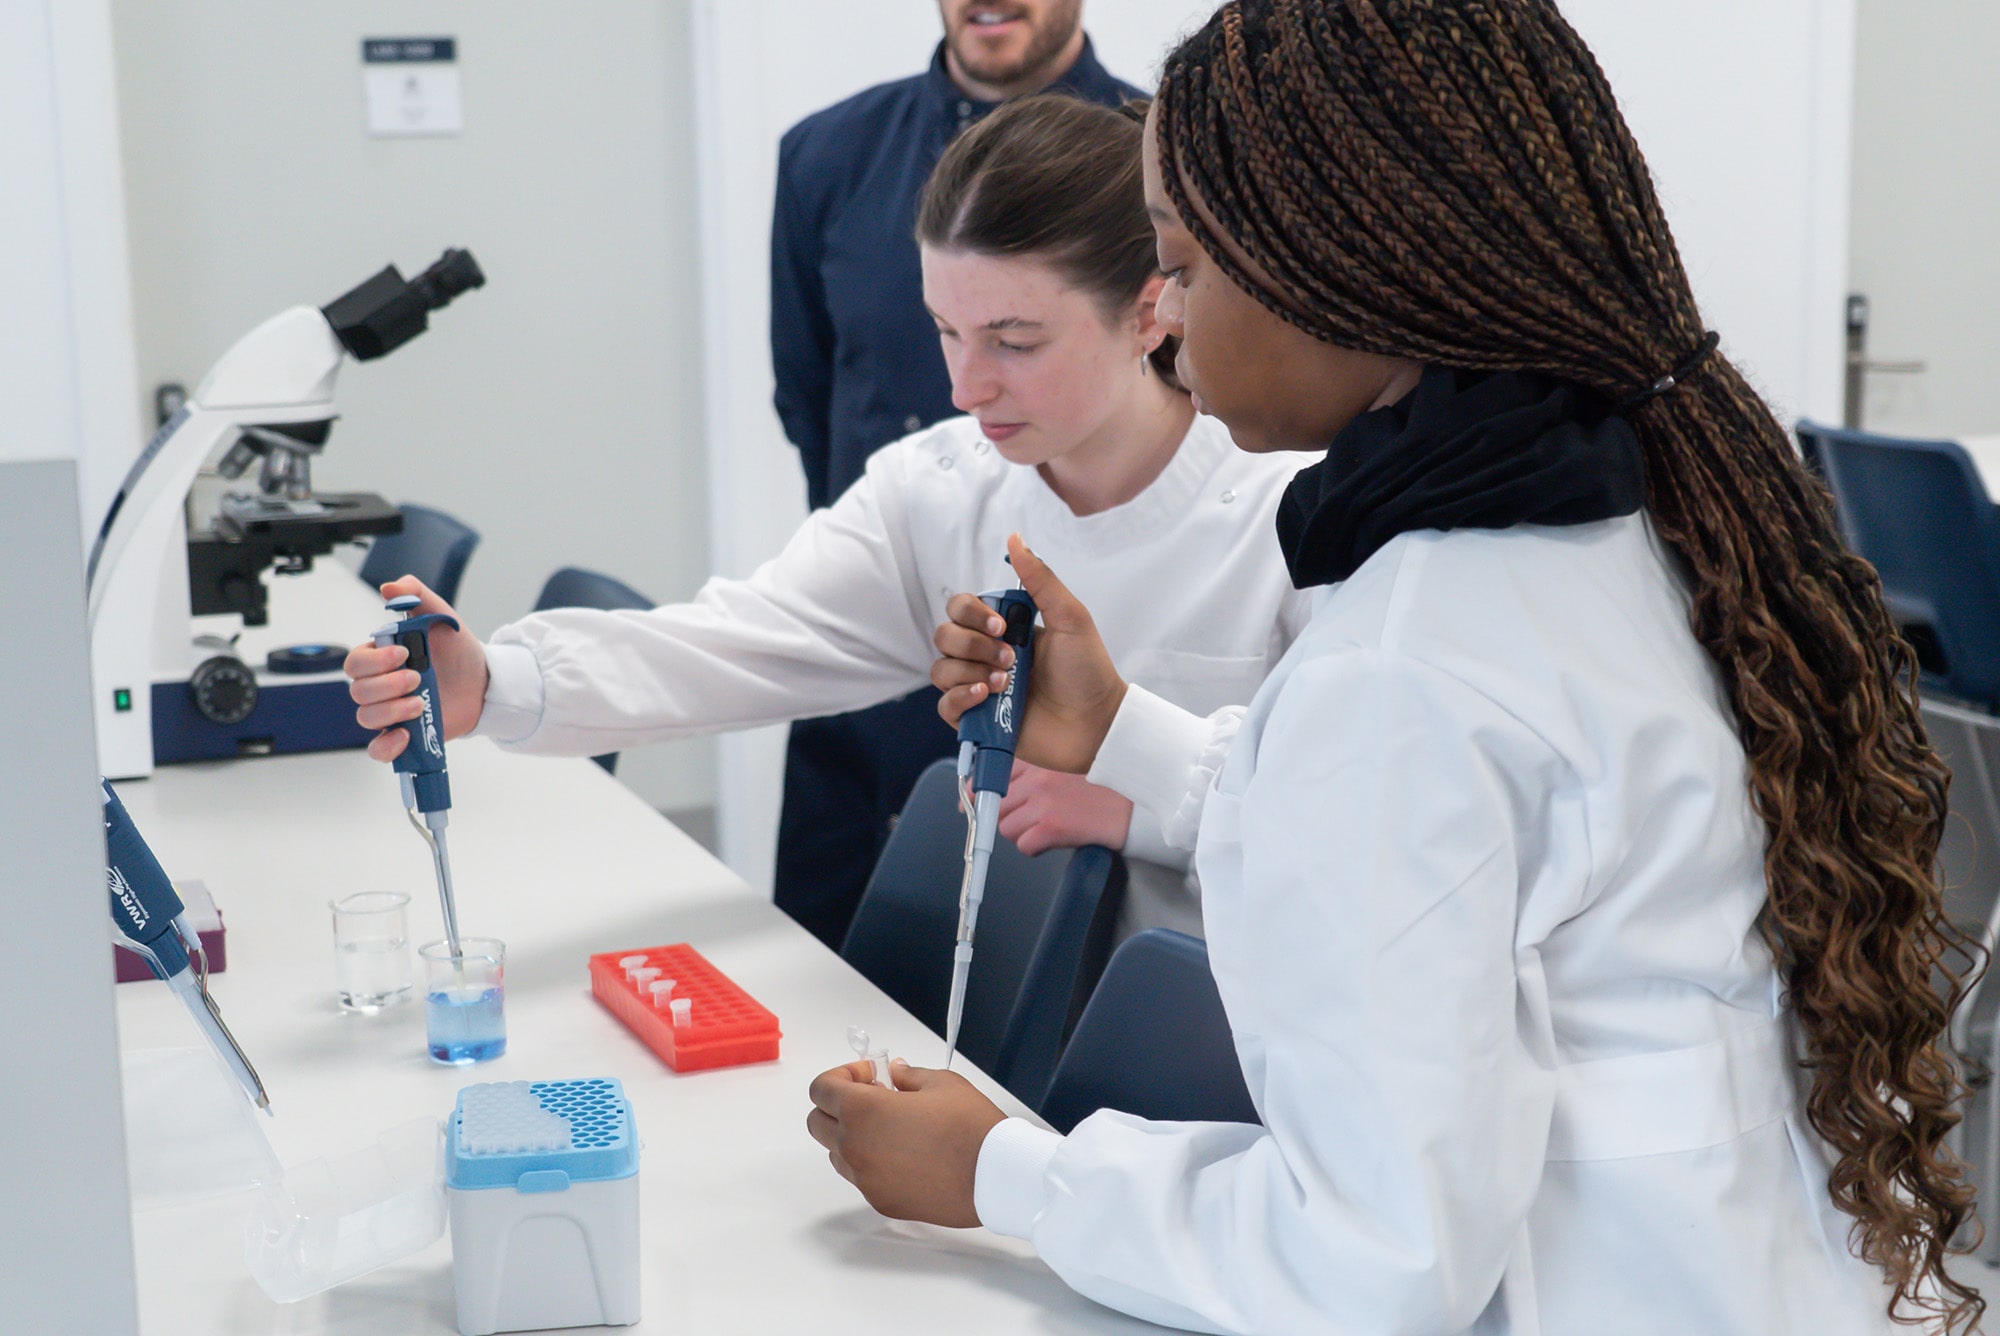 Two students in a lab wearing white lab coats dropping liquid into containers, whilst a lecturer observes